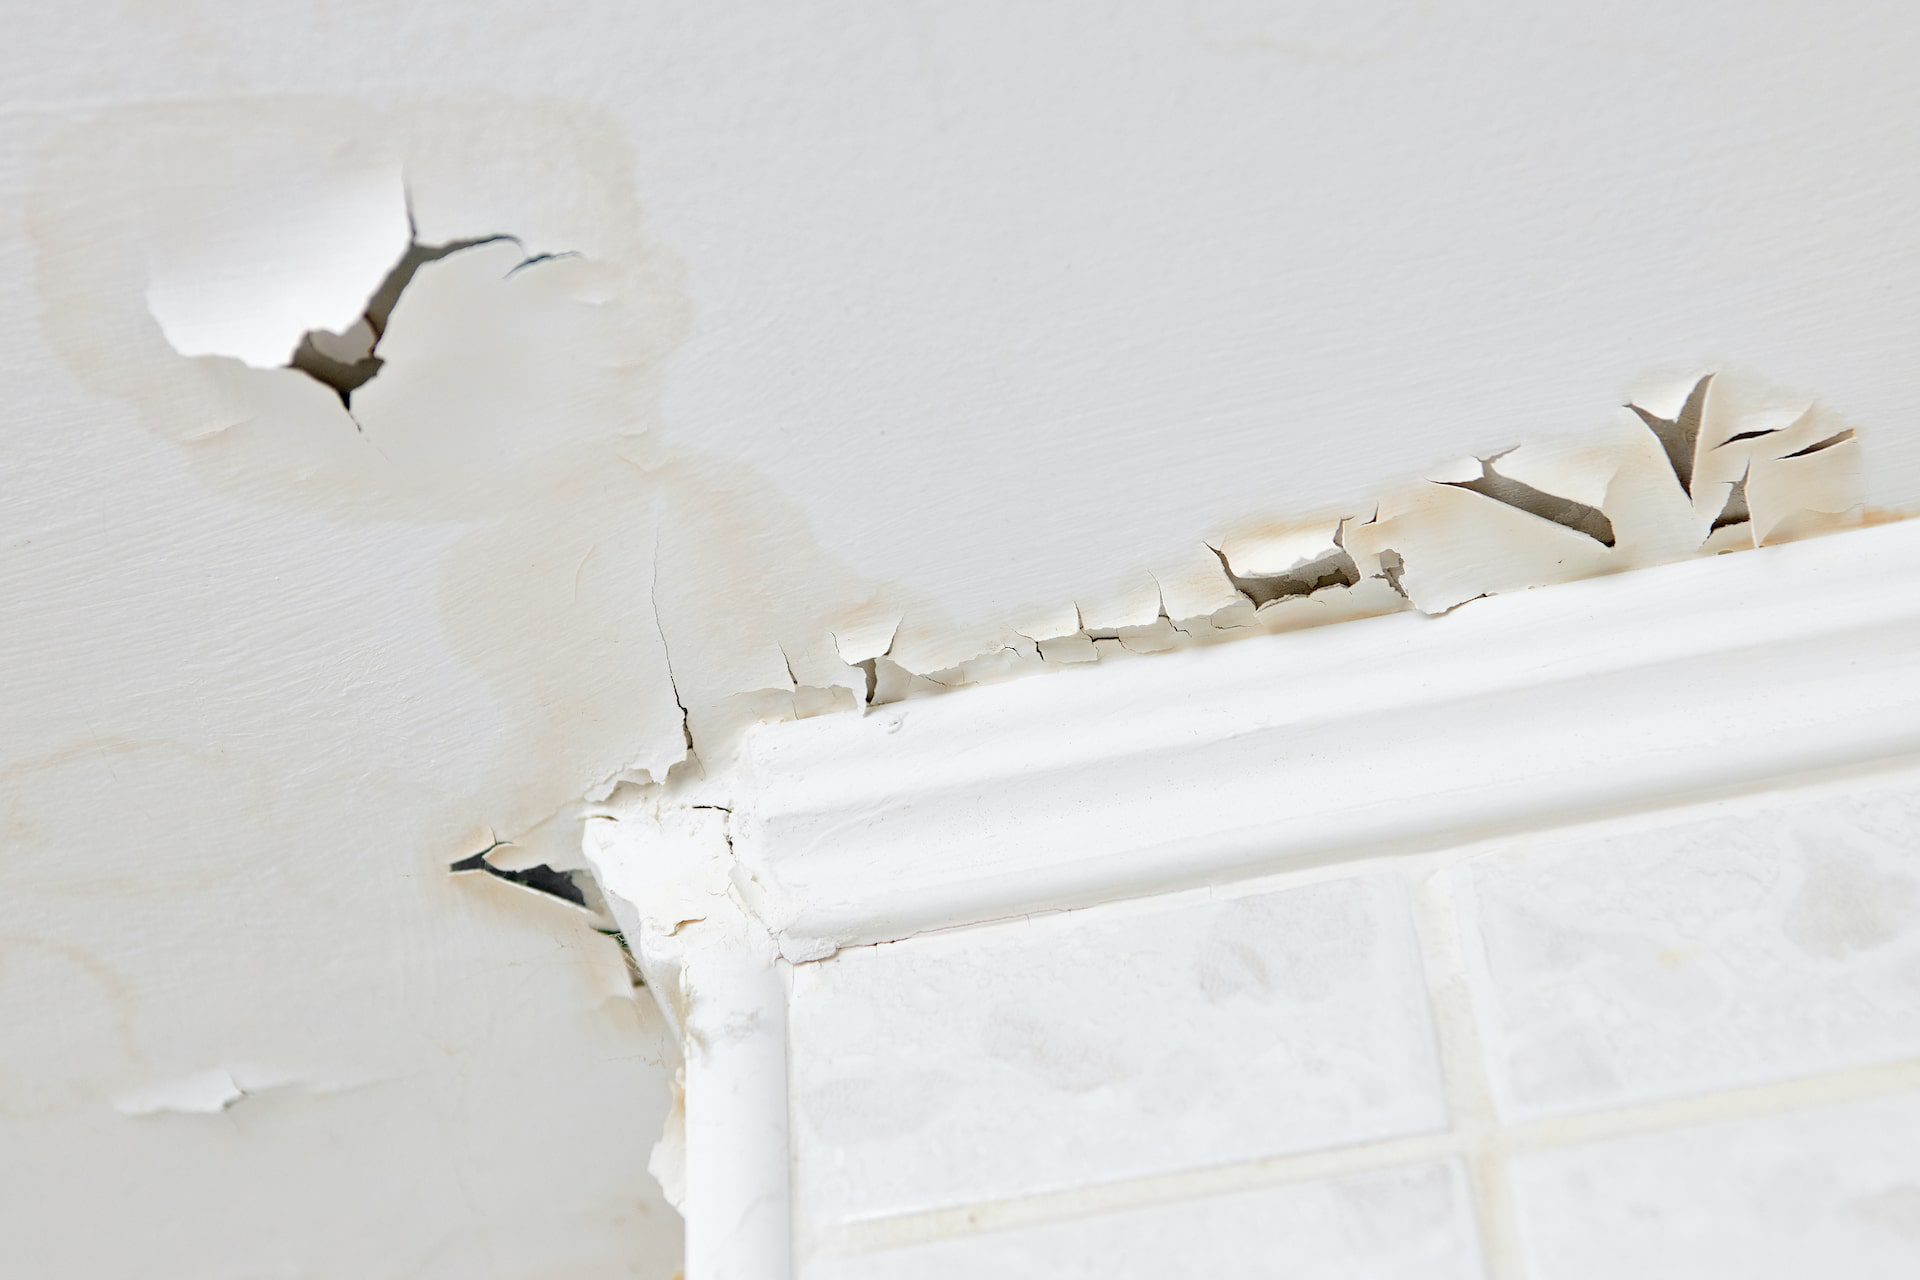 Image of water damage to plaster in the interior ceiling of a home.